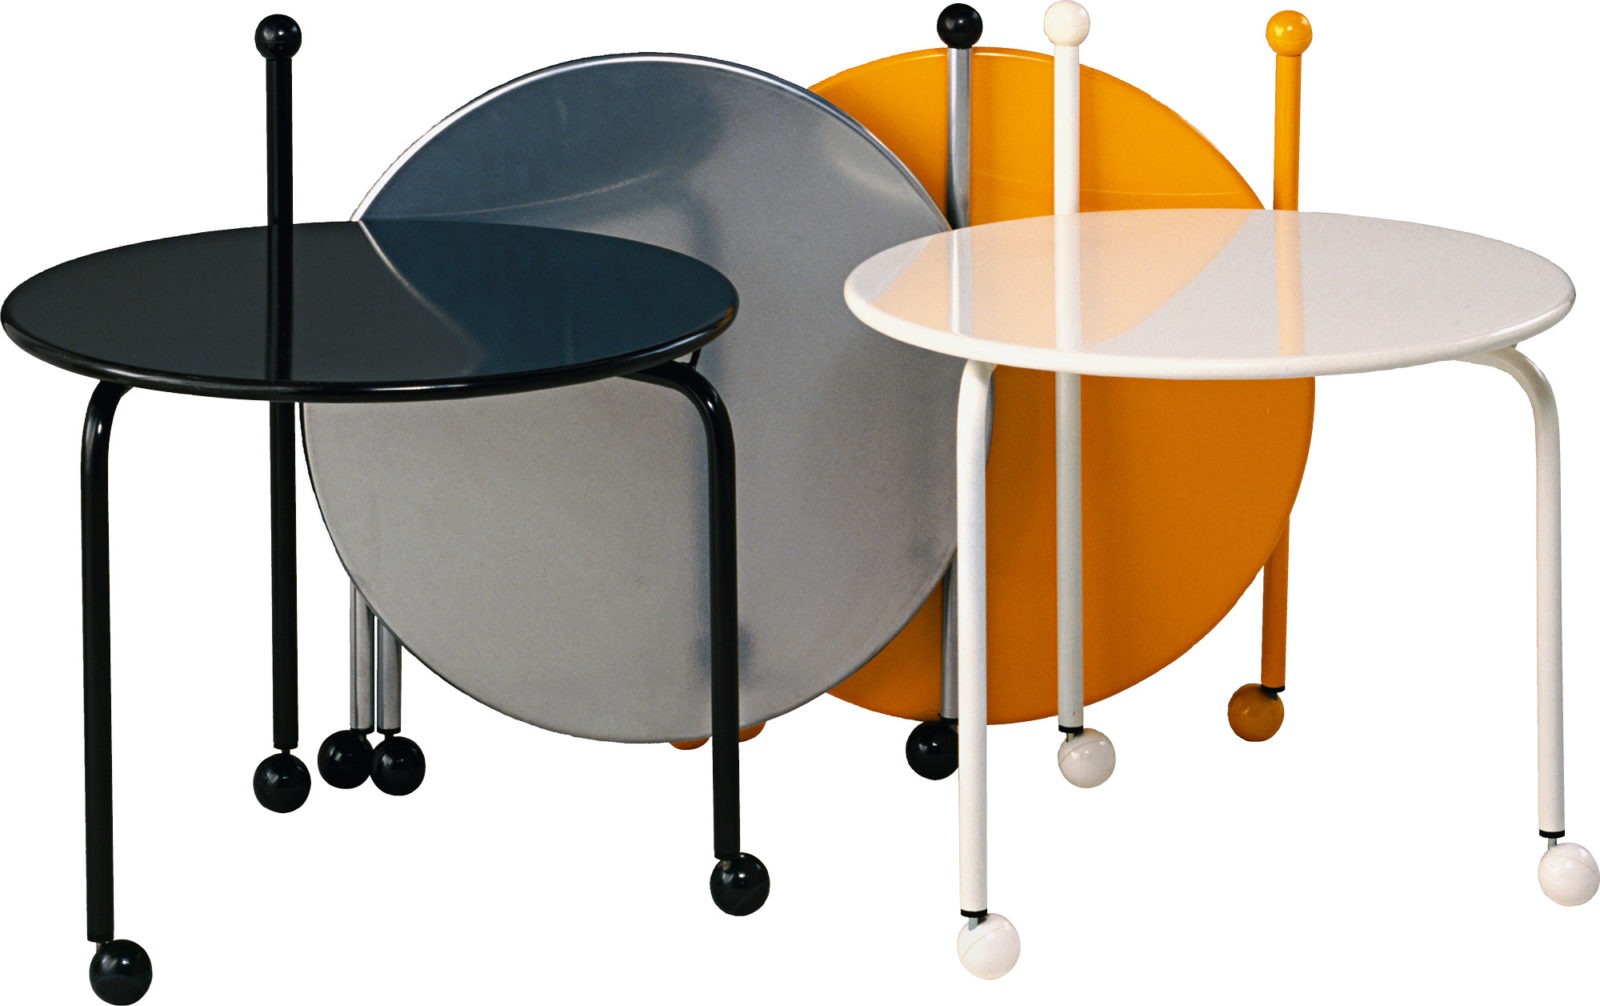 Four round foldable coffee tables on castors, in different colours, two of the table tops are folded up.